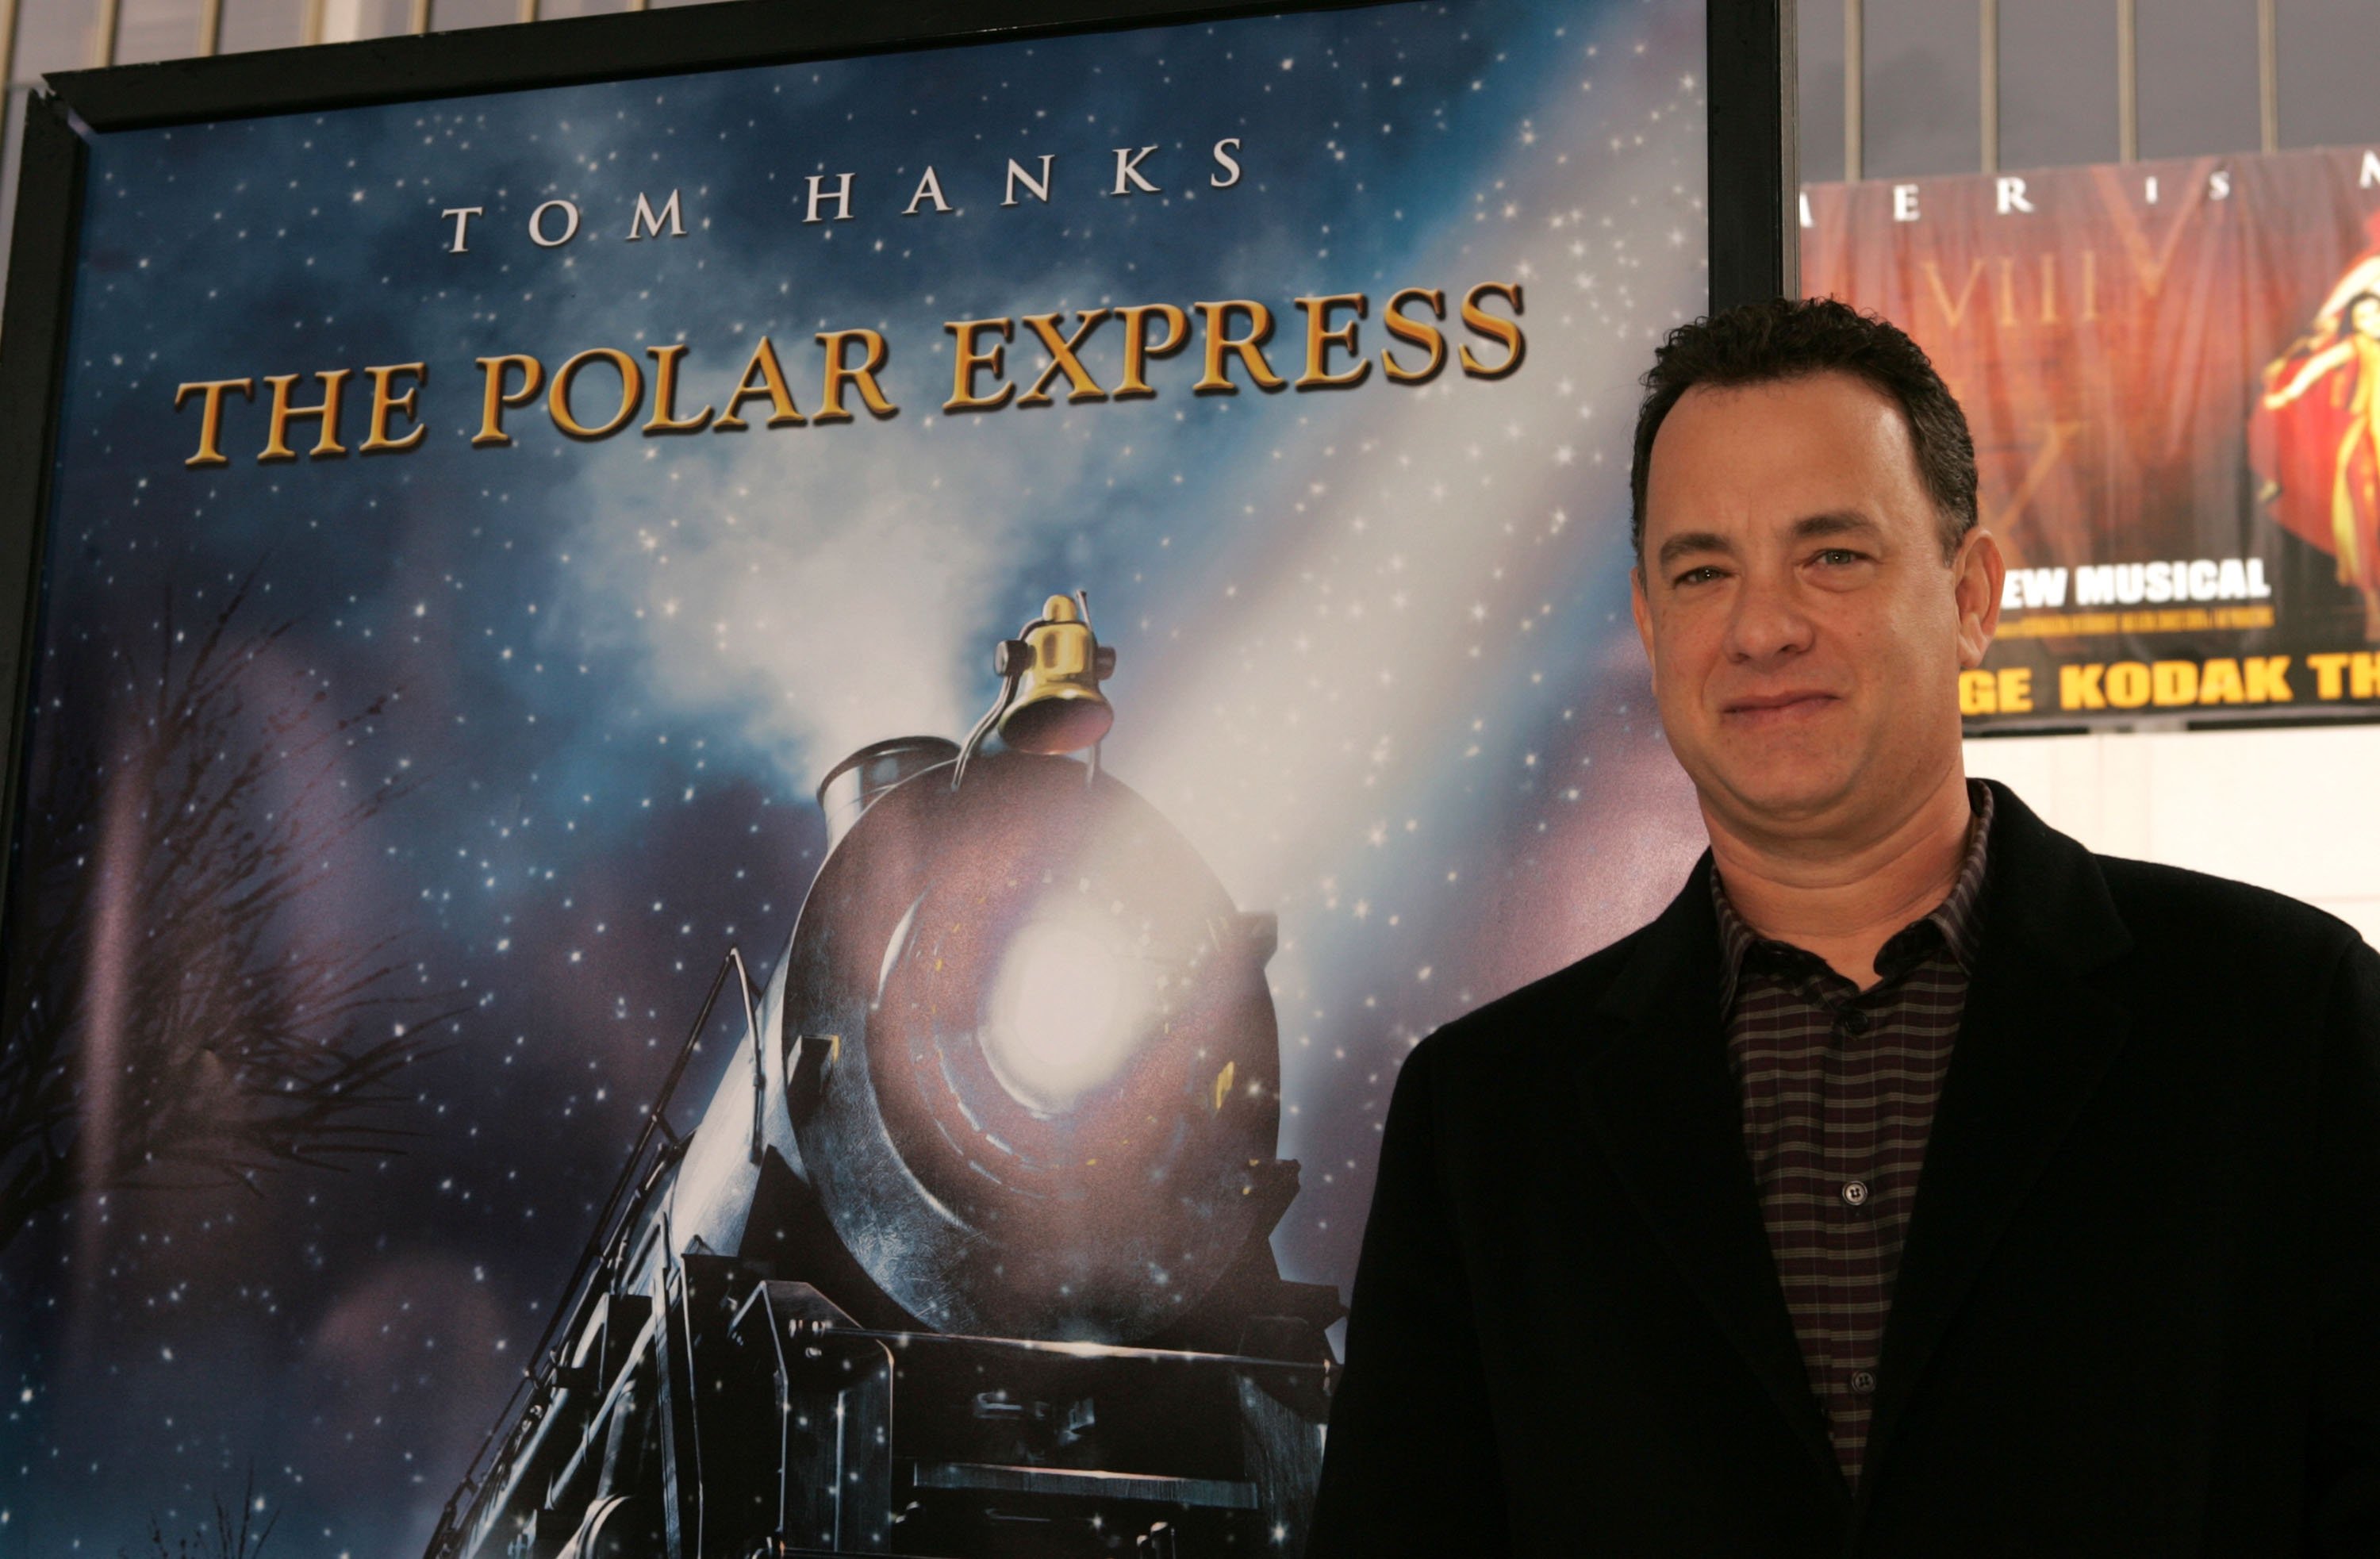 Polar Express star Tom Hanks in front of the poster